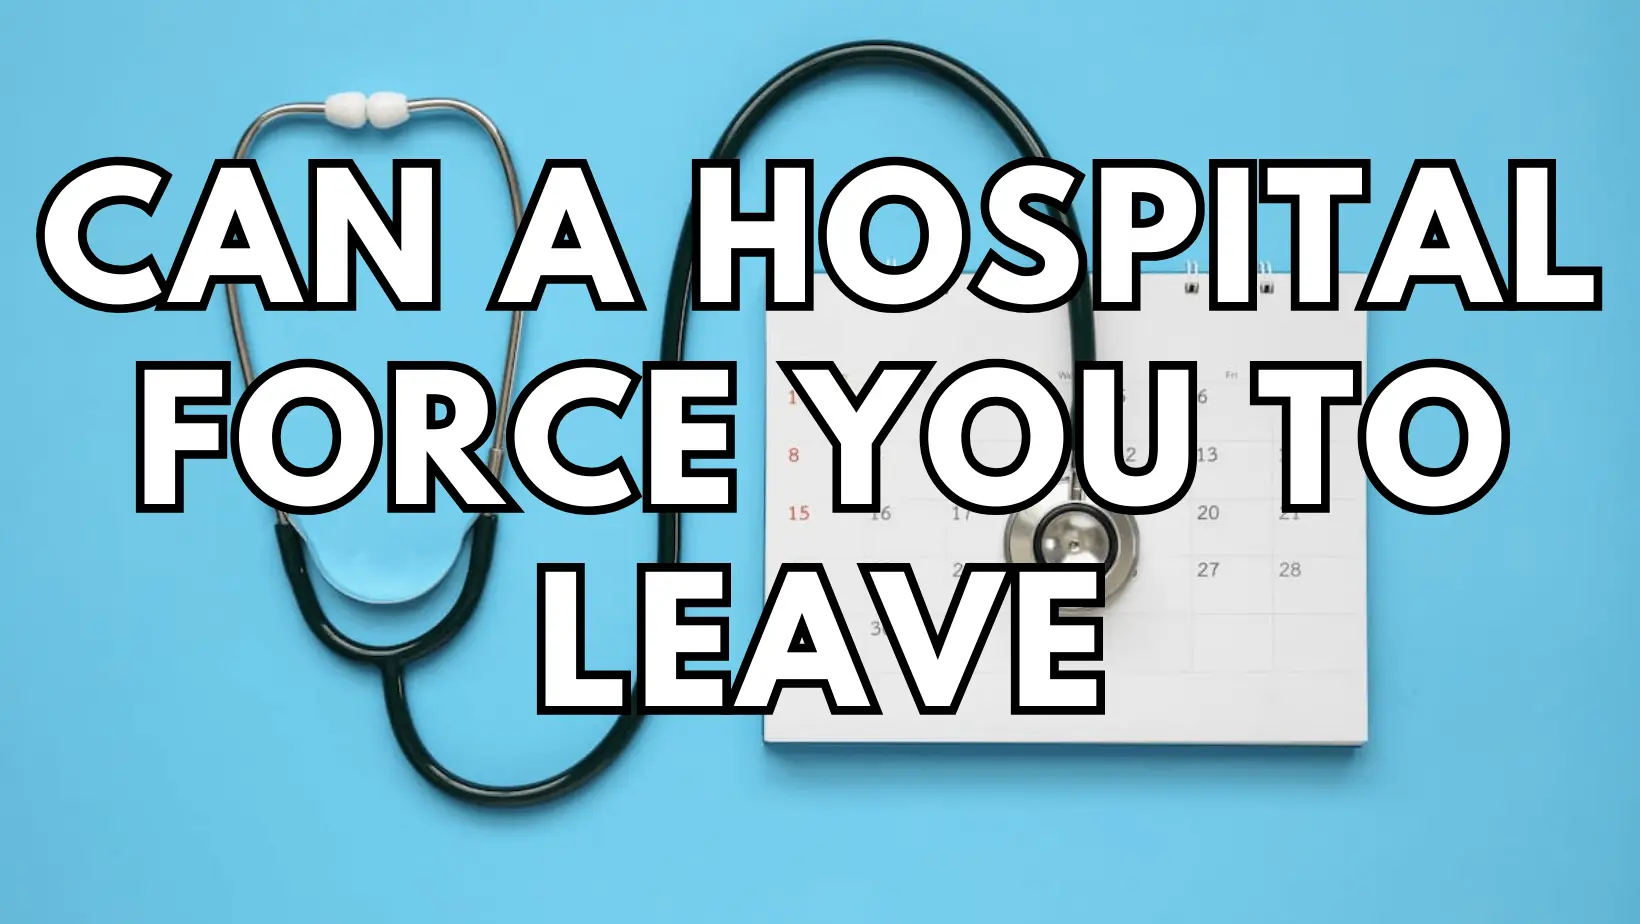 Can a Hospital Force You to leave featured image